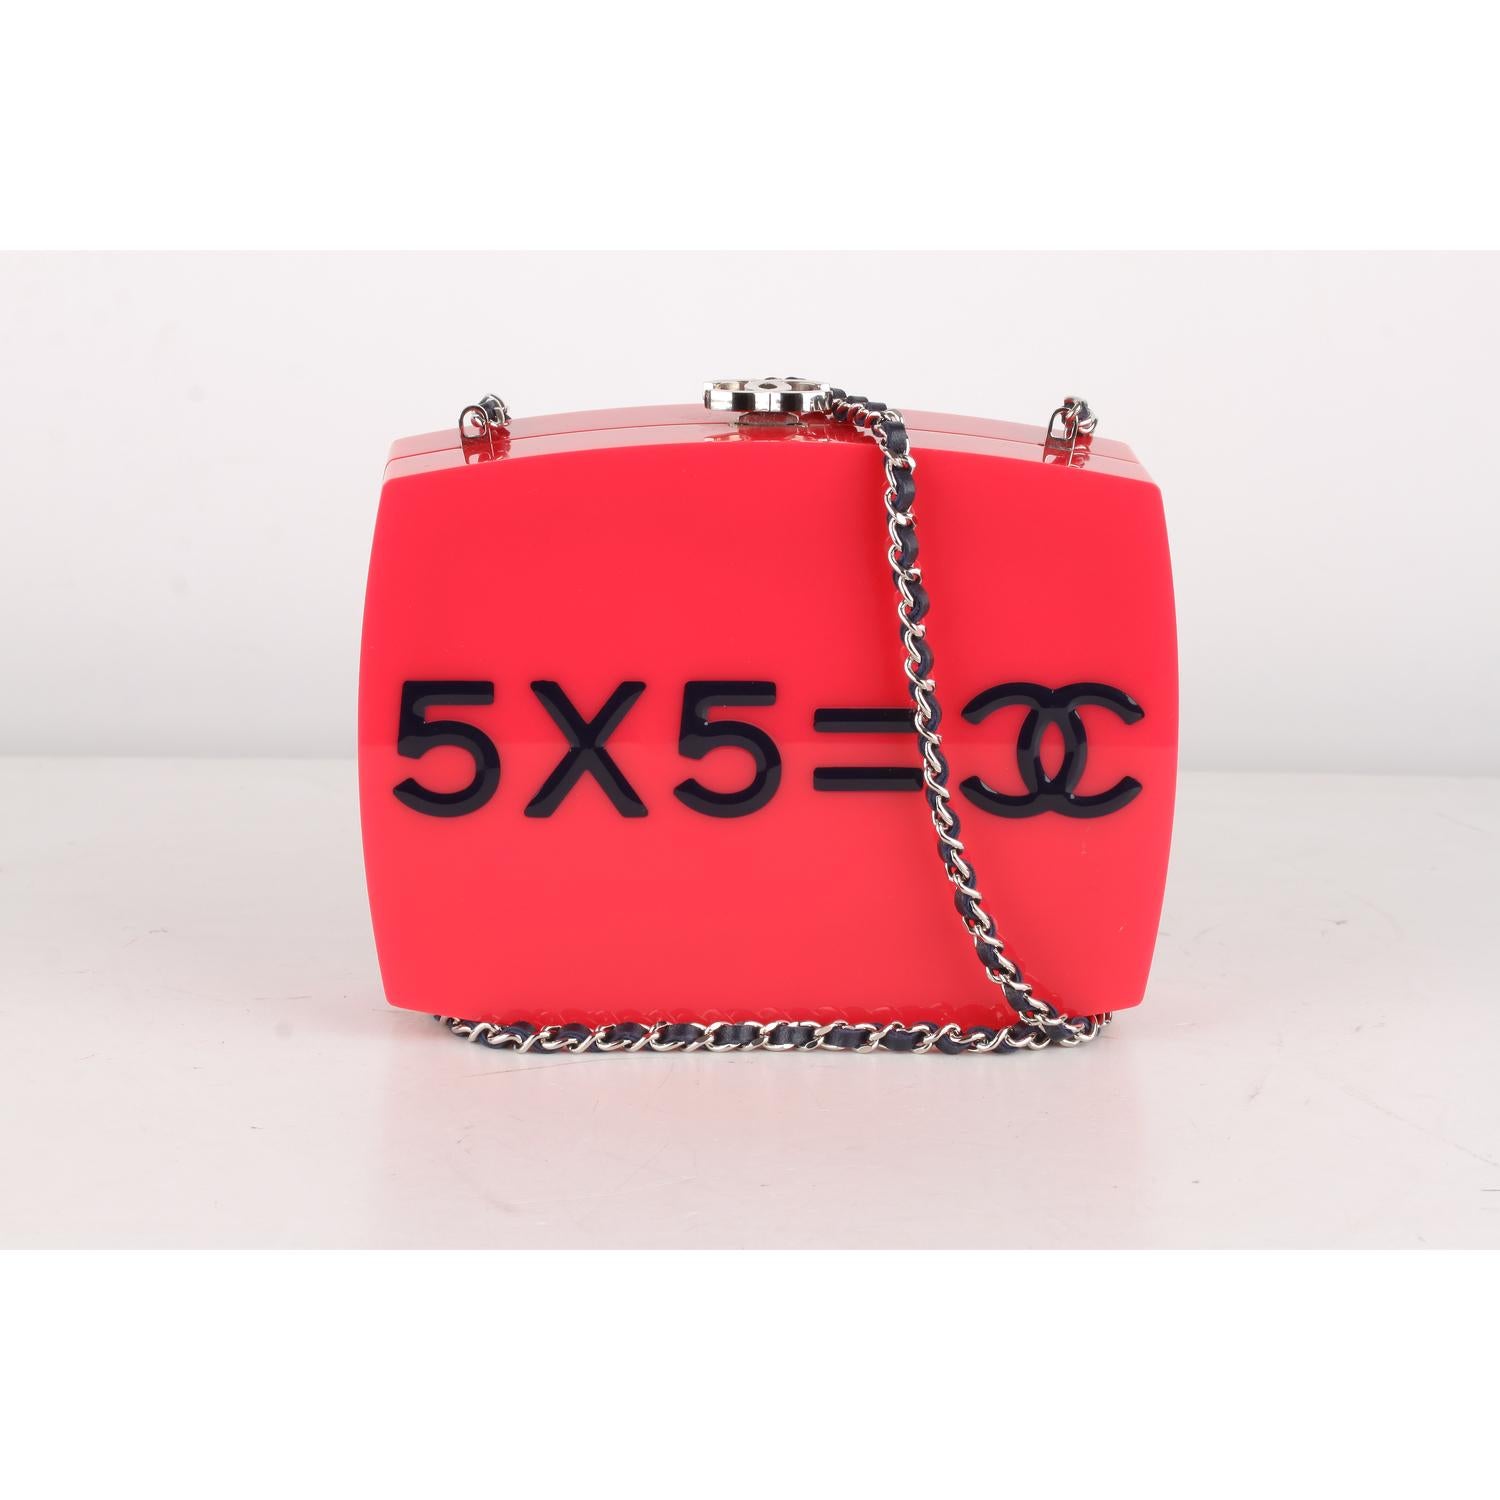 Chanel 2015 Je Ne Suis Pas En Solde Box Clutch with Chain Strap In Excellent Condition In Rome, Rome